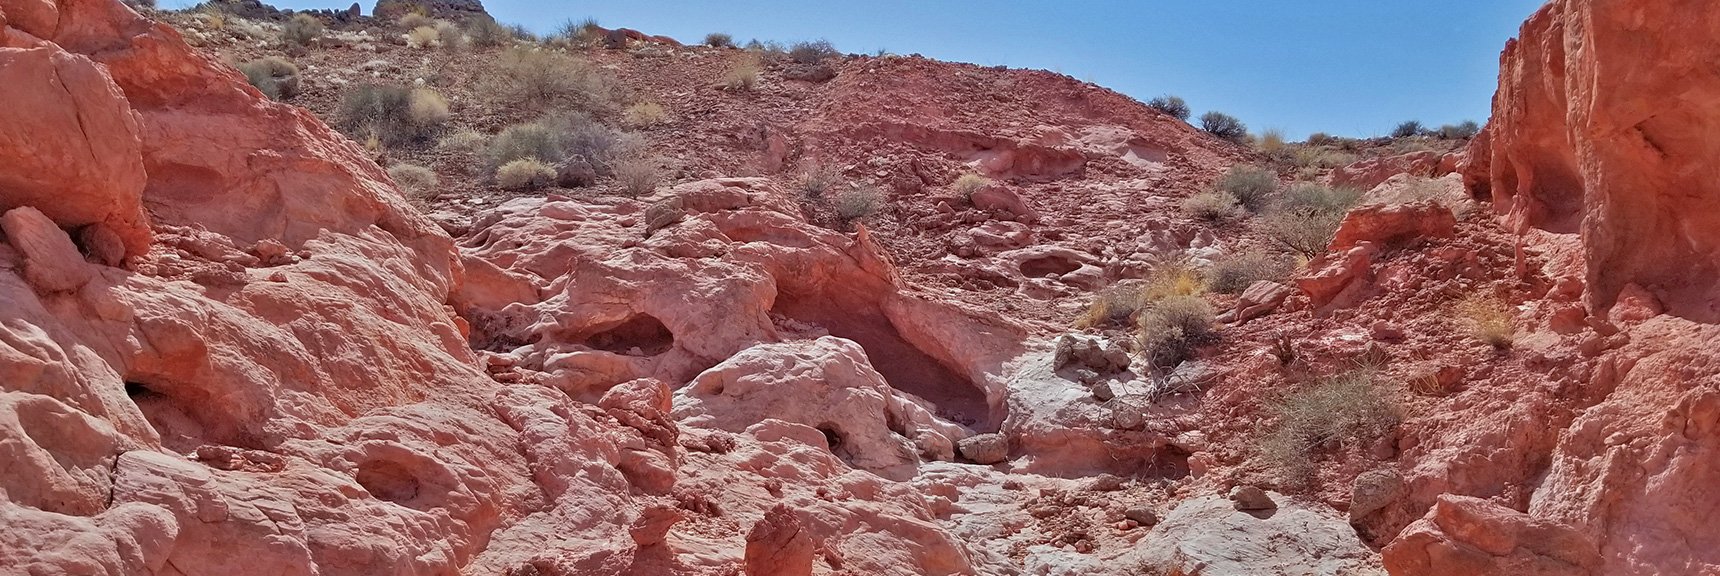 Descent Route Through Red Rock Formations - Ancient Jurassic Frozen Sanddunes | Northern Bowl of Fire | Lake Mead National Recreation Area, Nevada